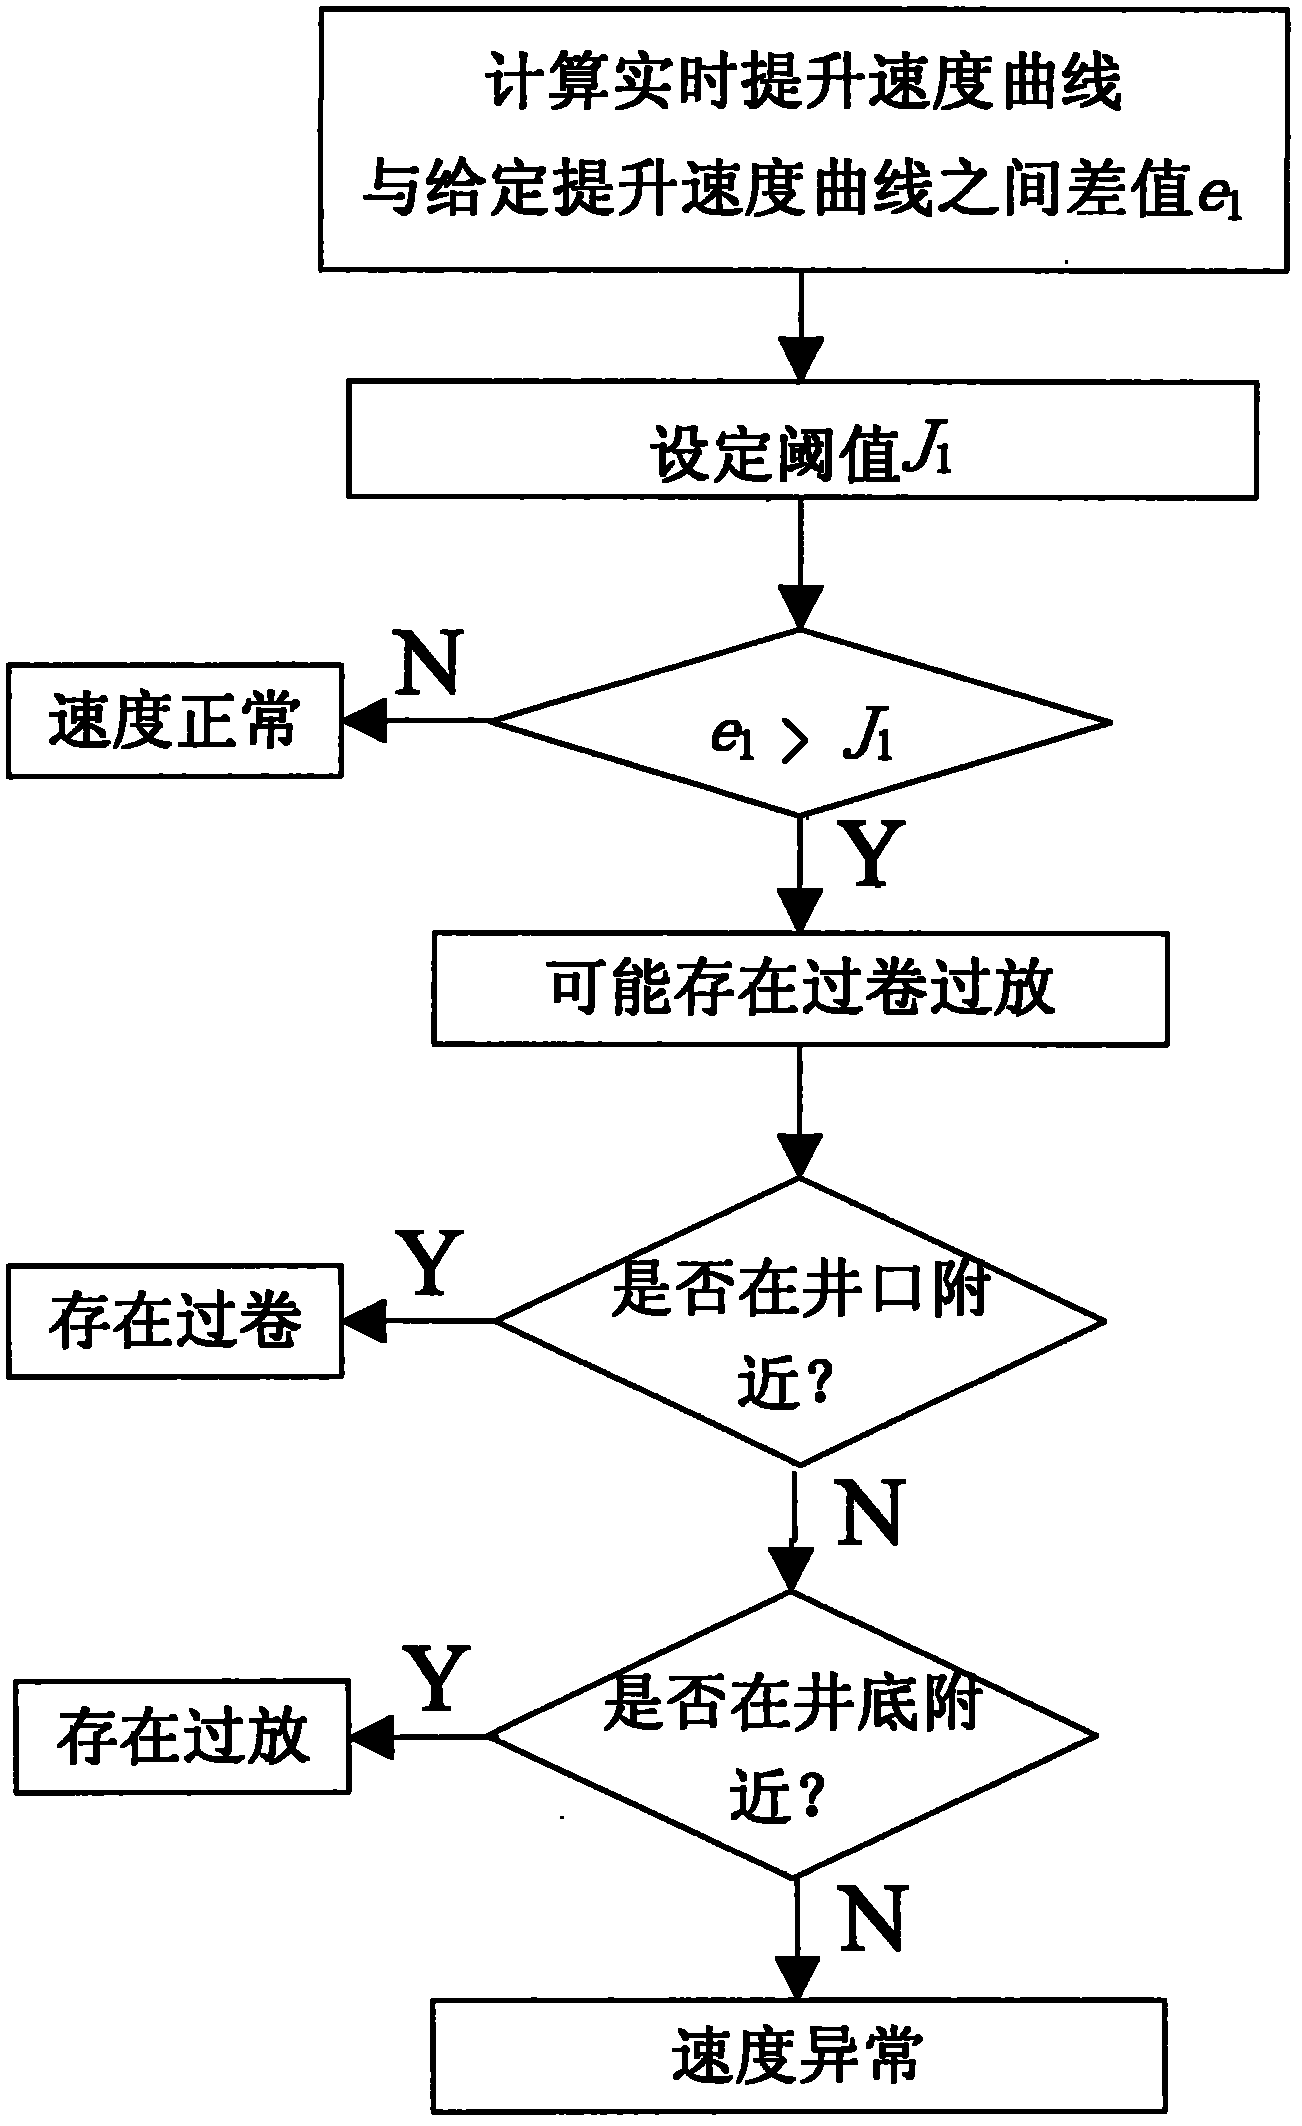 Method for detecting operation troubles of mine hoist